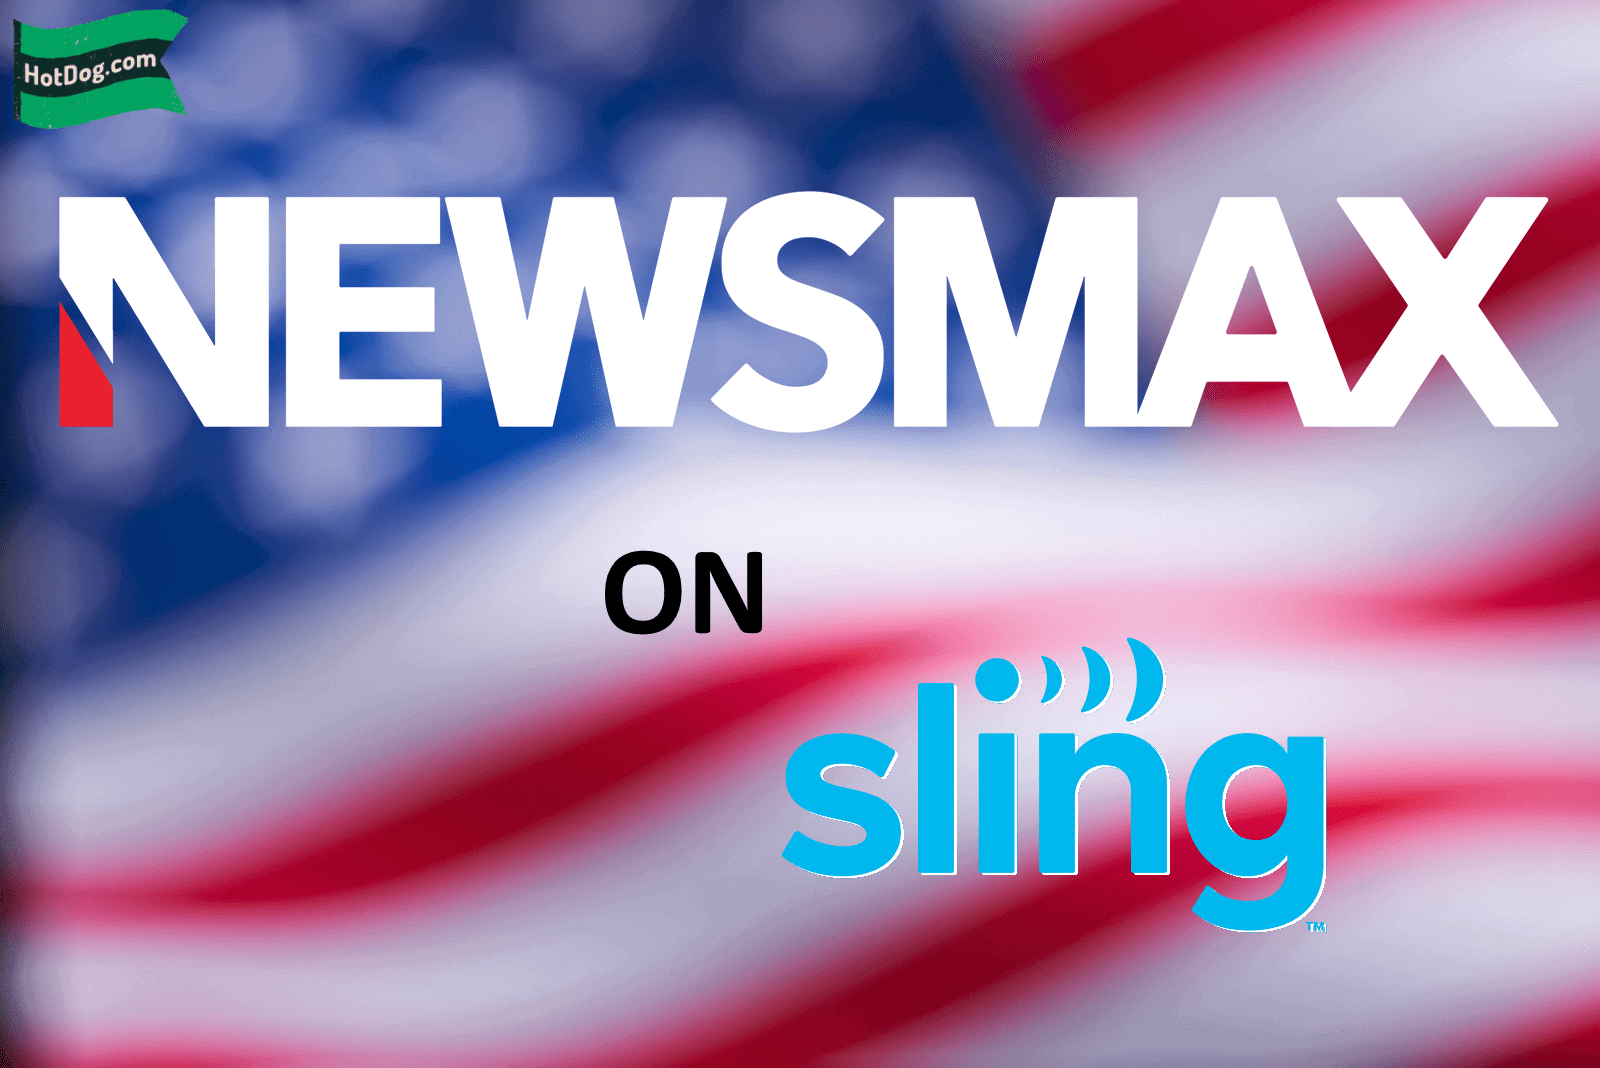 Get the Conservative News You Are Missing Like Newsmax With Sling TV